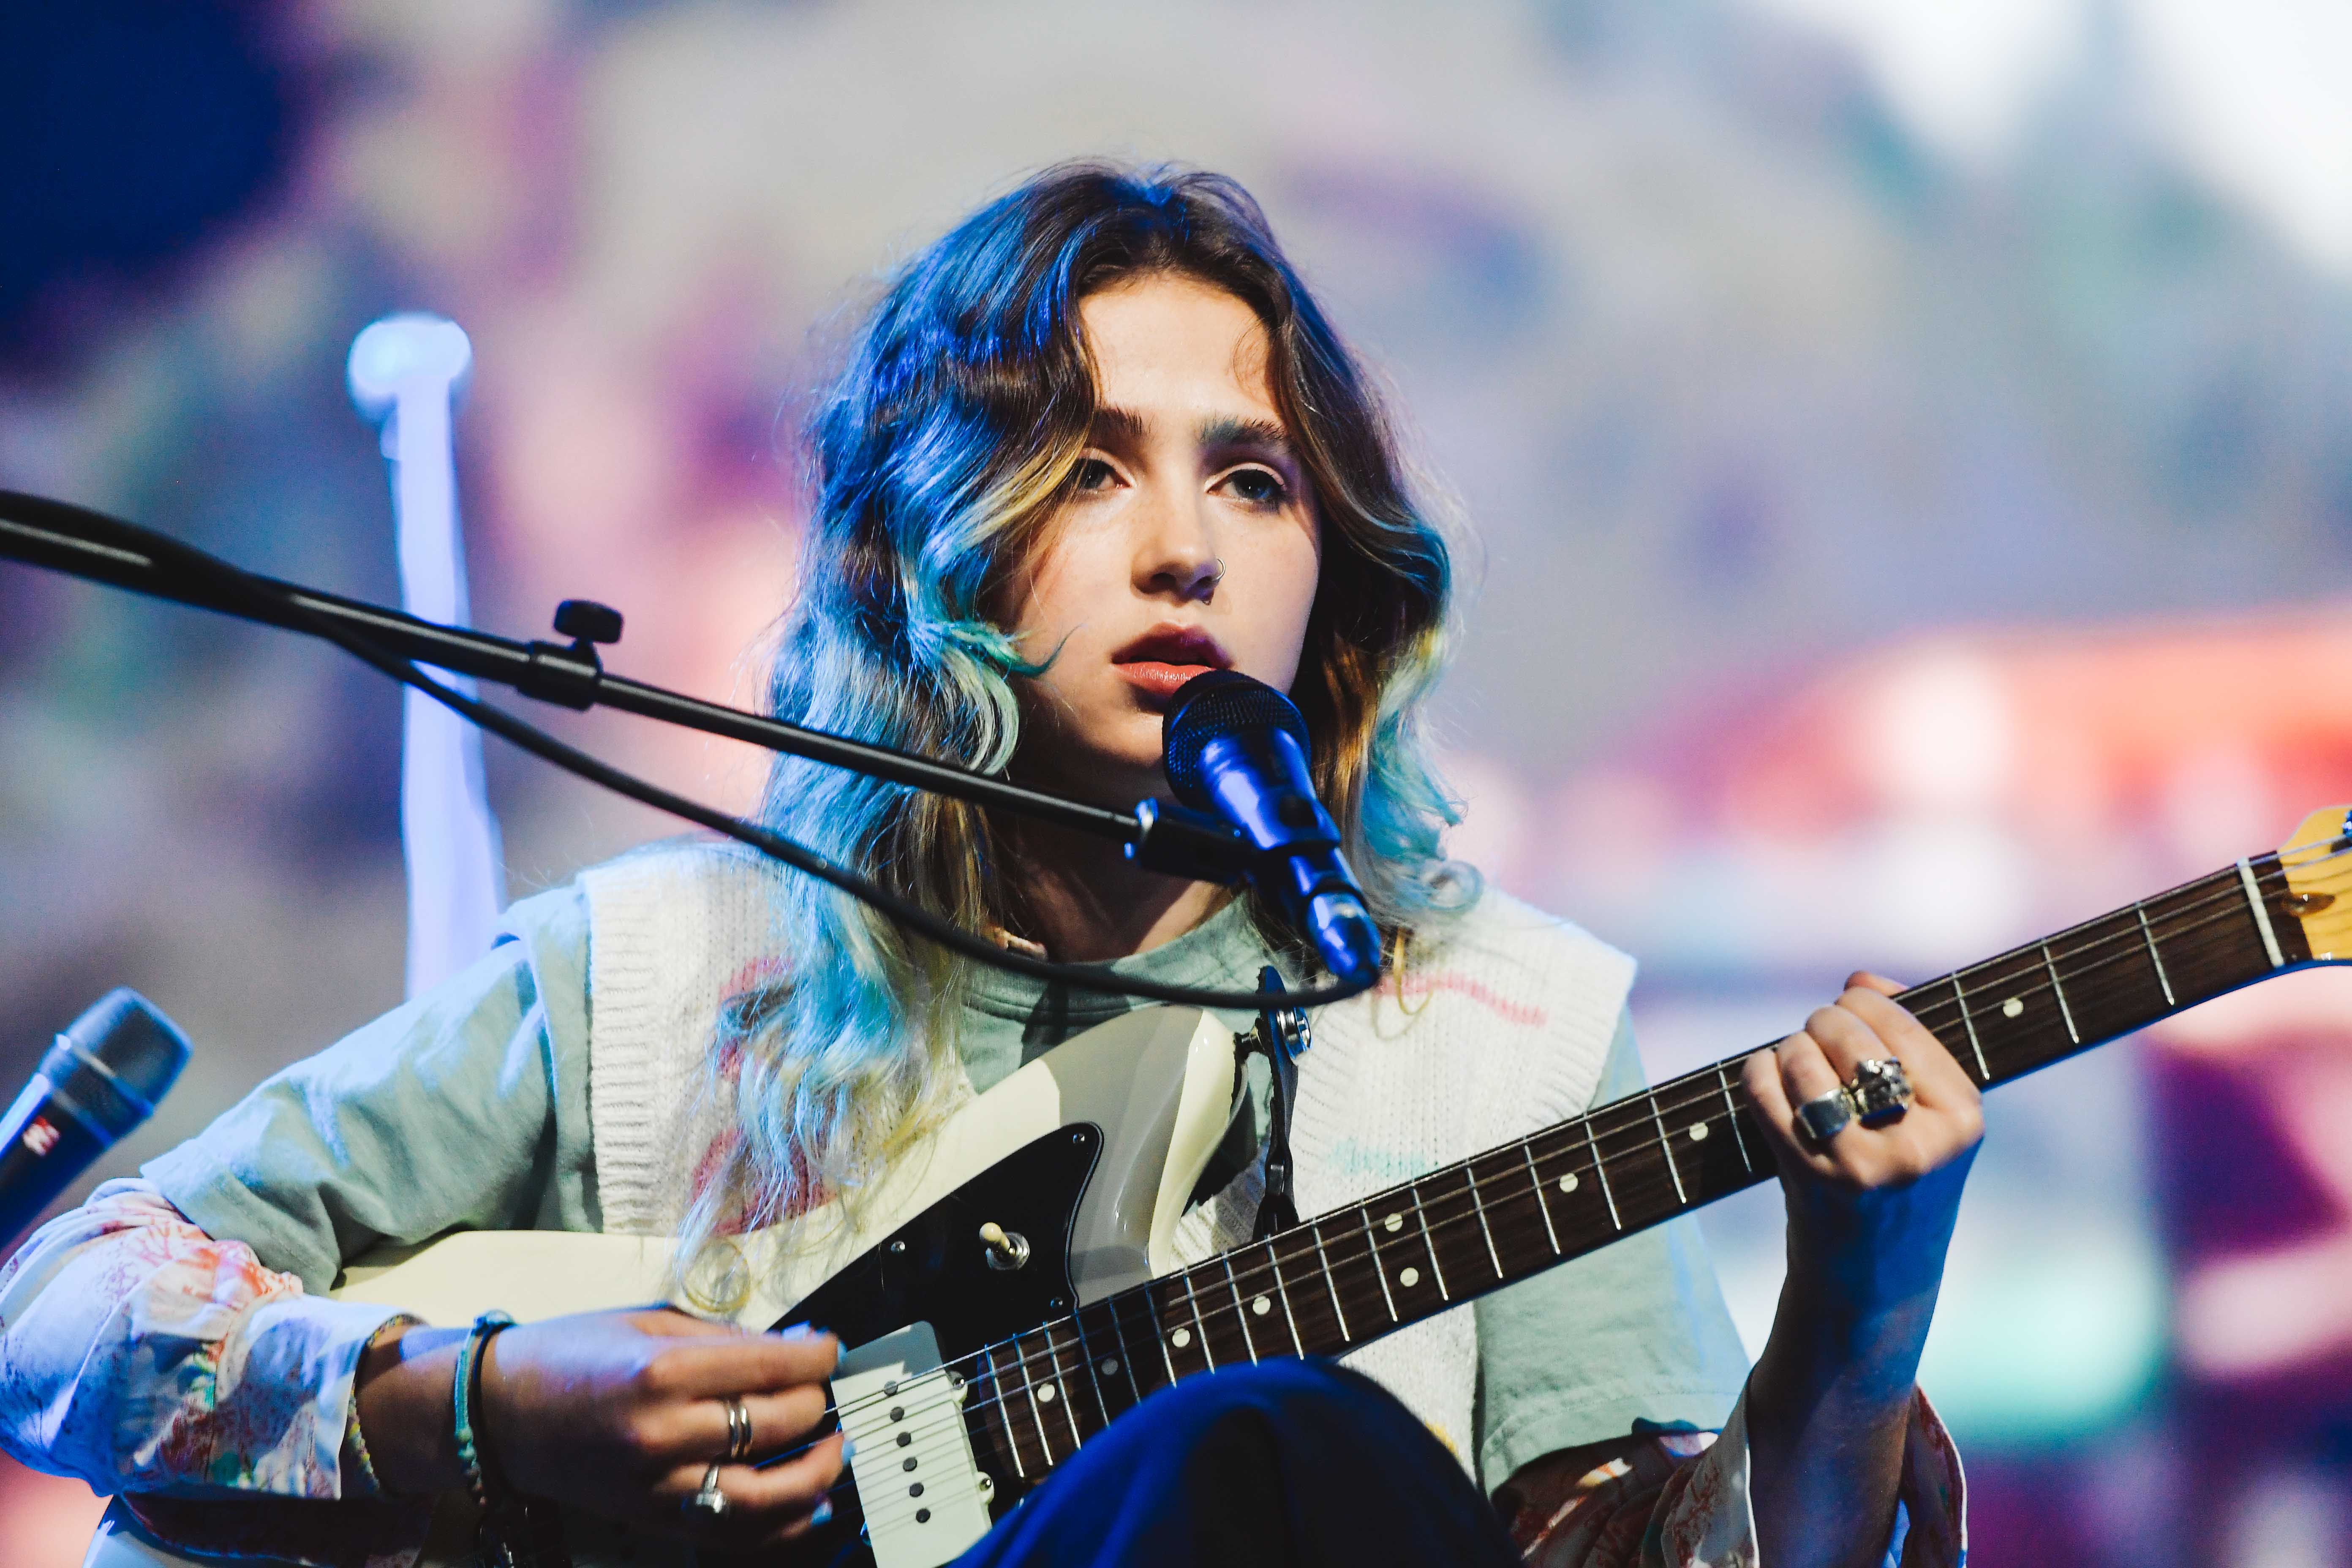 Clairo performs at The Forum on March 10, 2020, in Inglewood, California. | Source: Getty Images